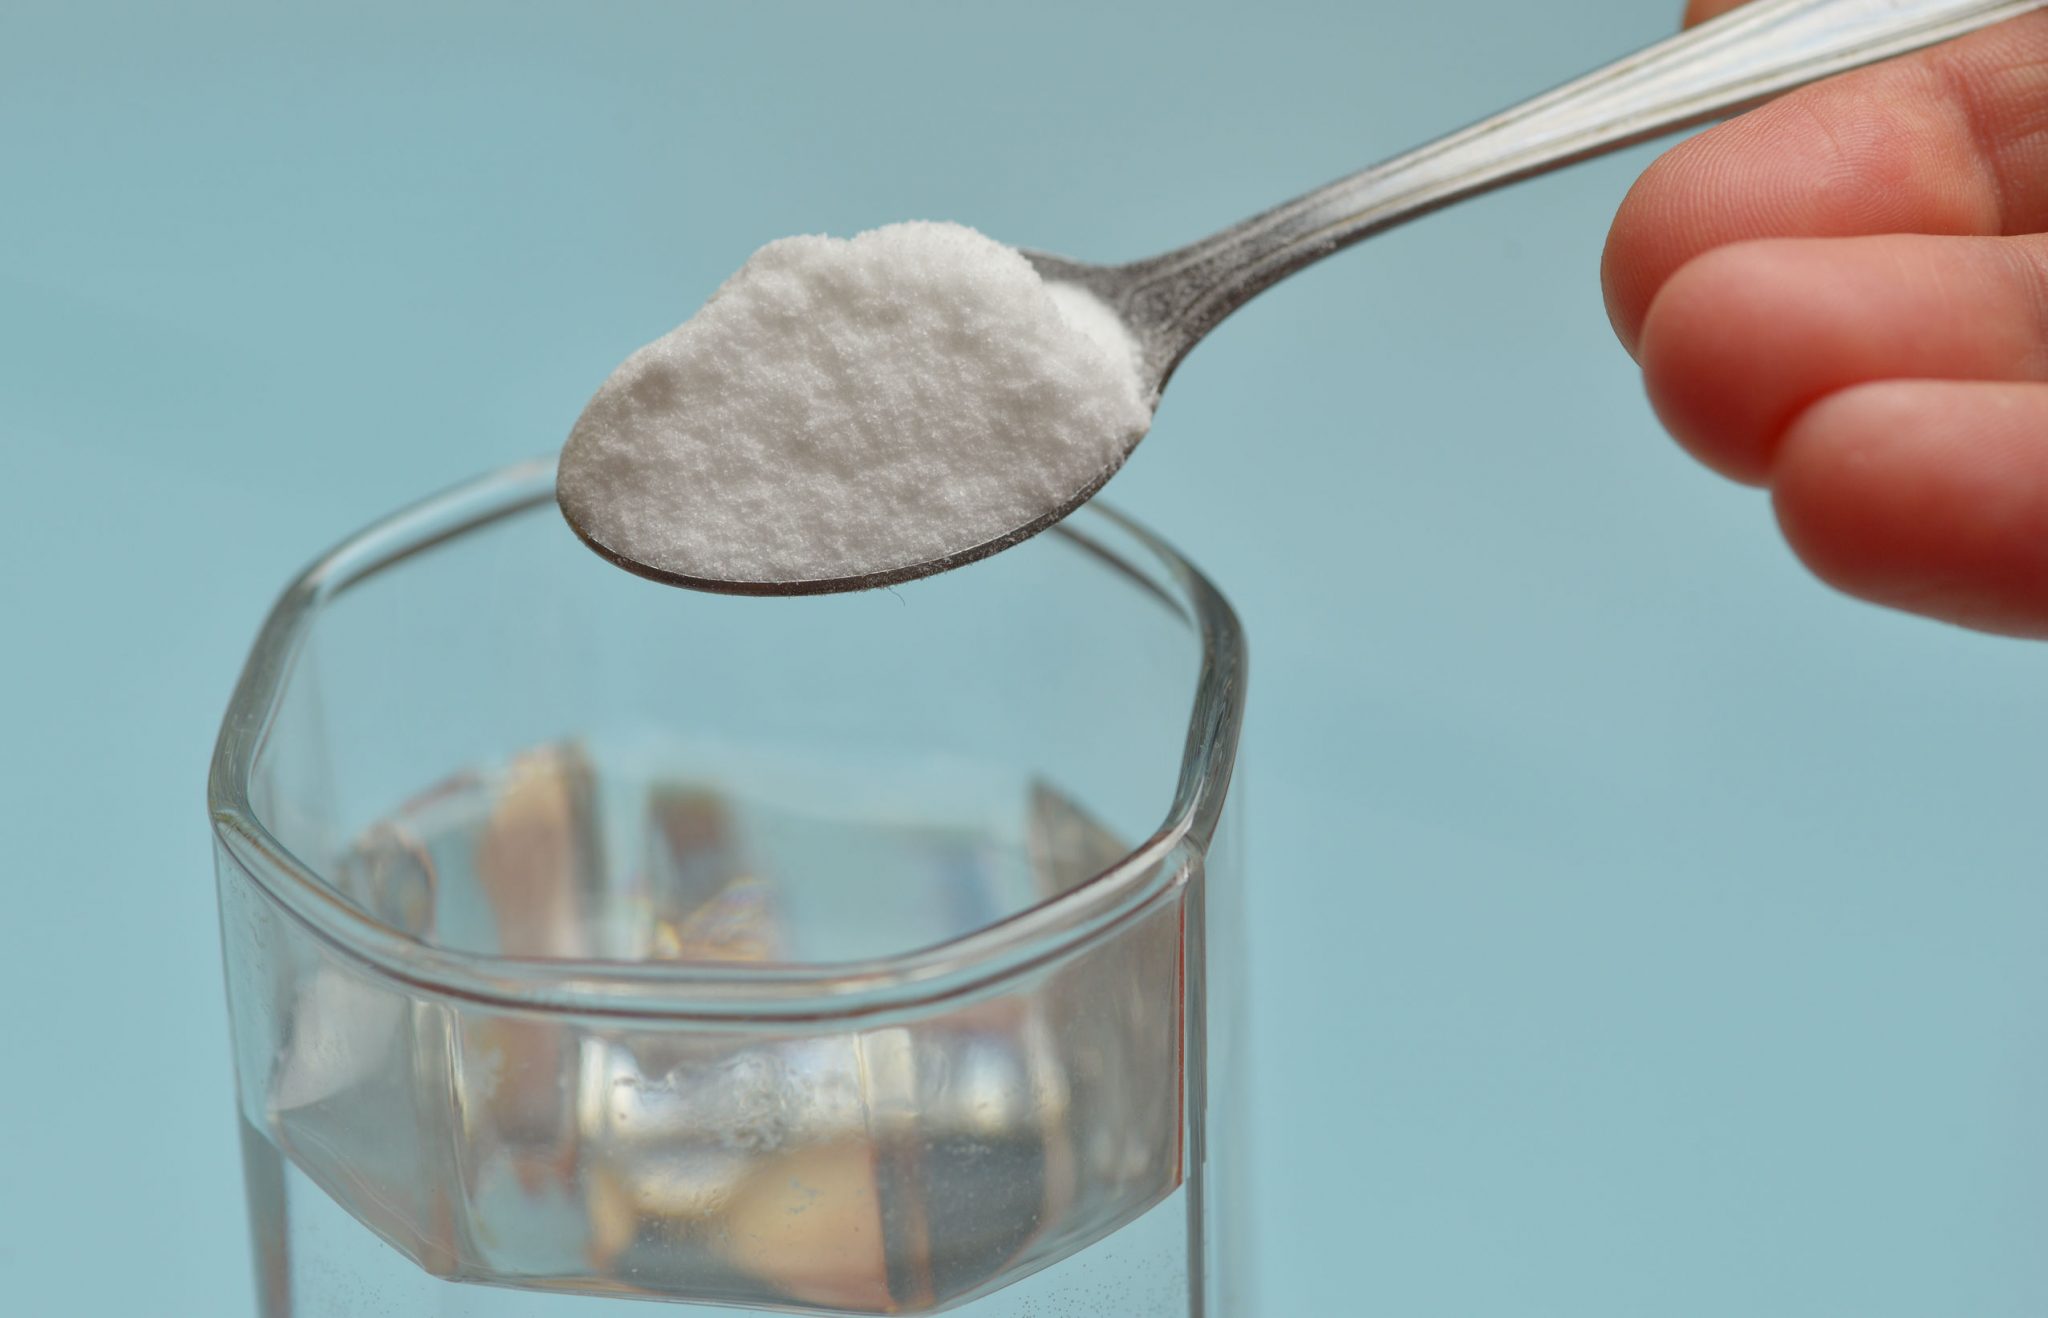 Drinking Baking Soda for Weight Loss: Does It Work?